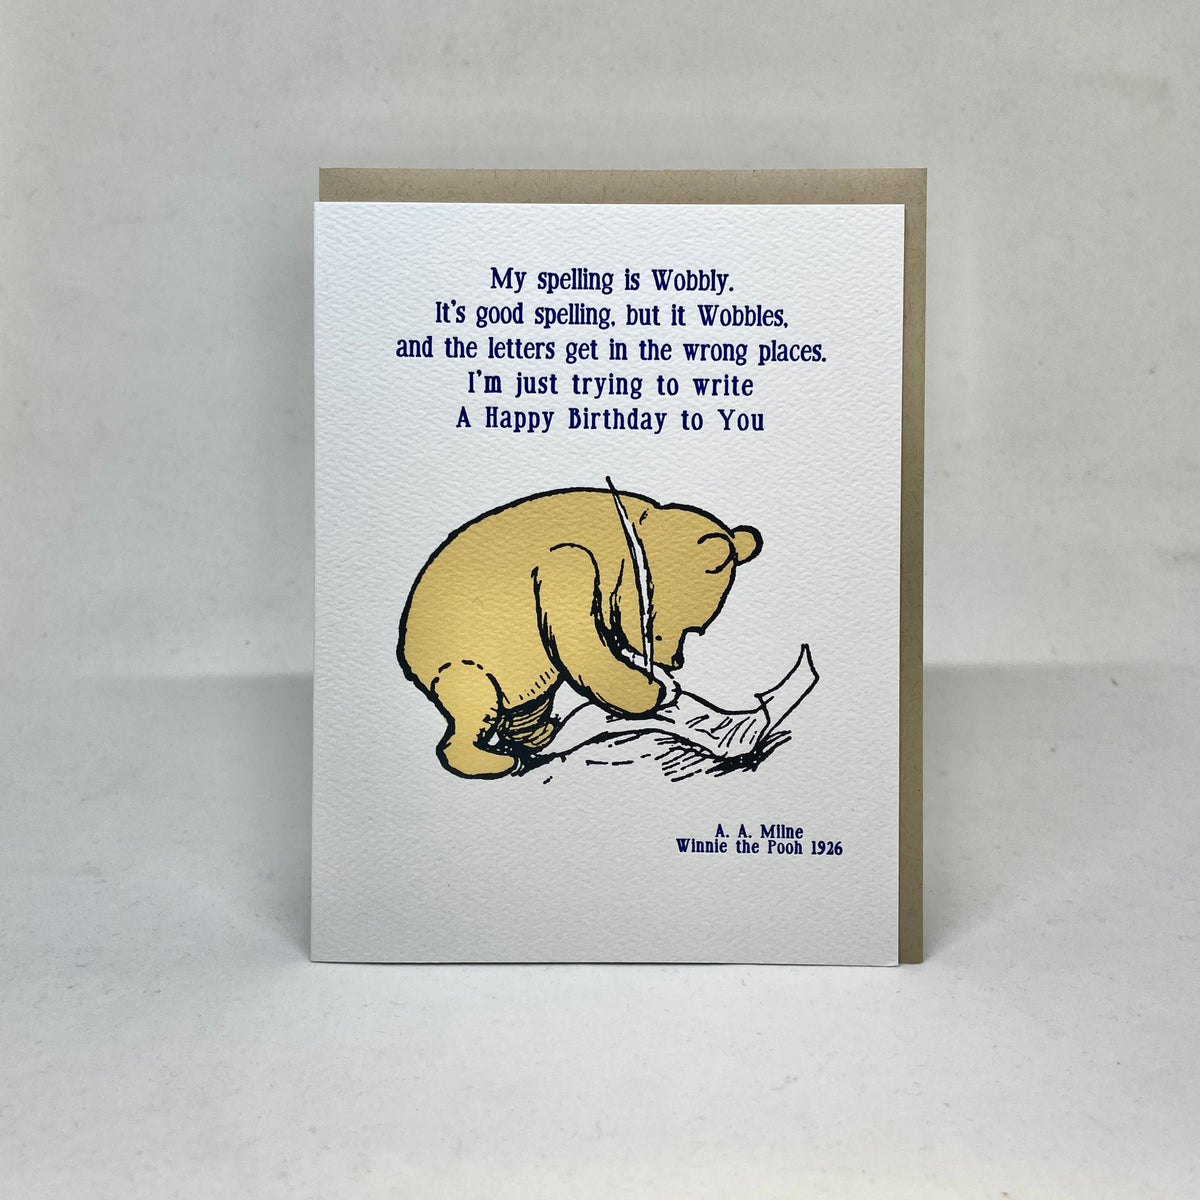 My Spelling Is Wobbly - Pooh Card